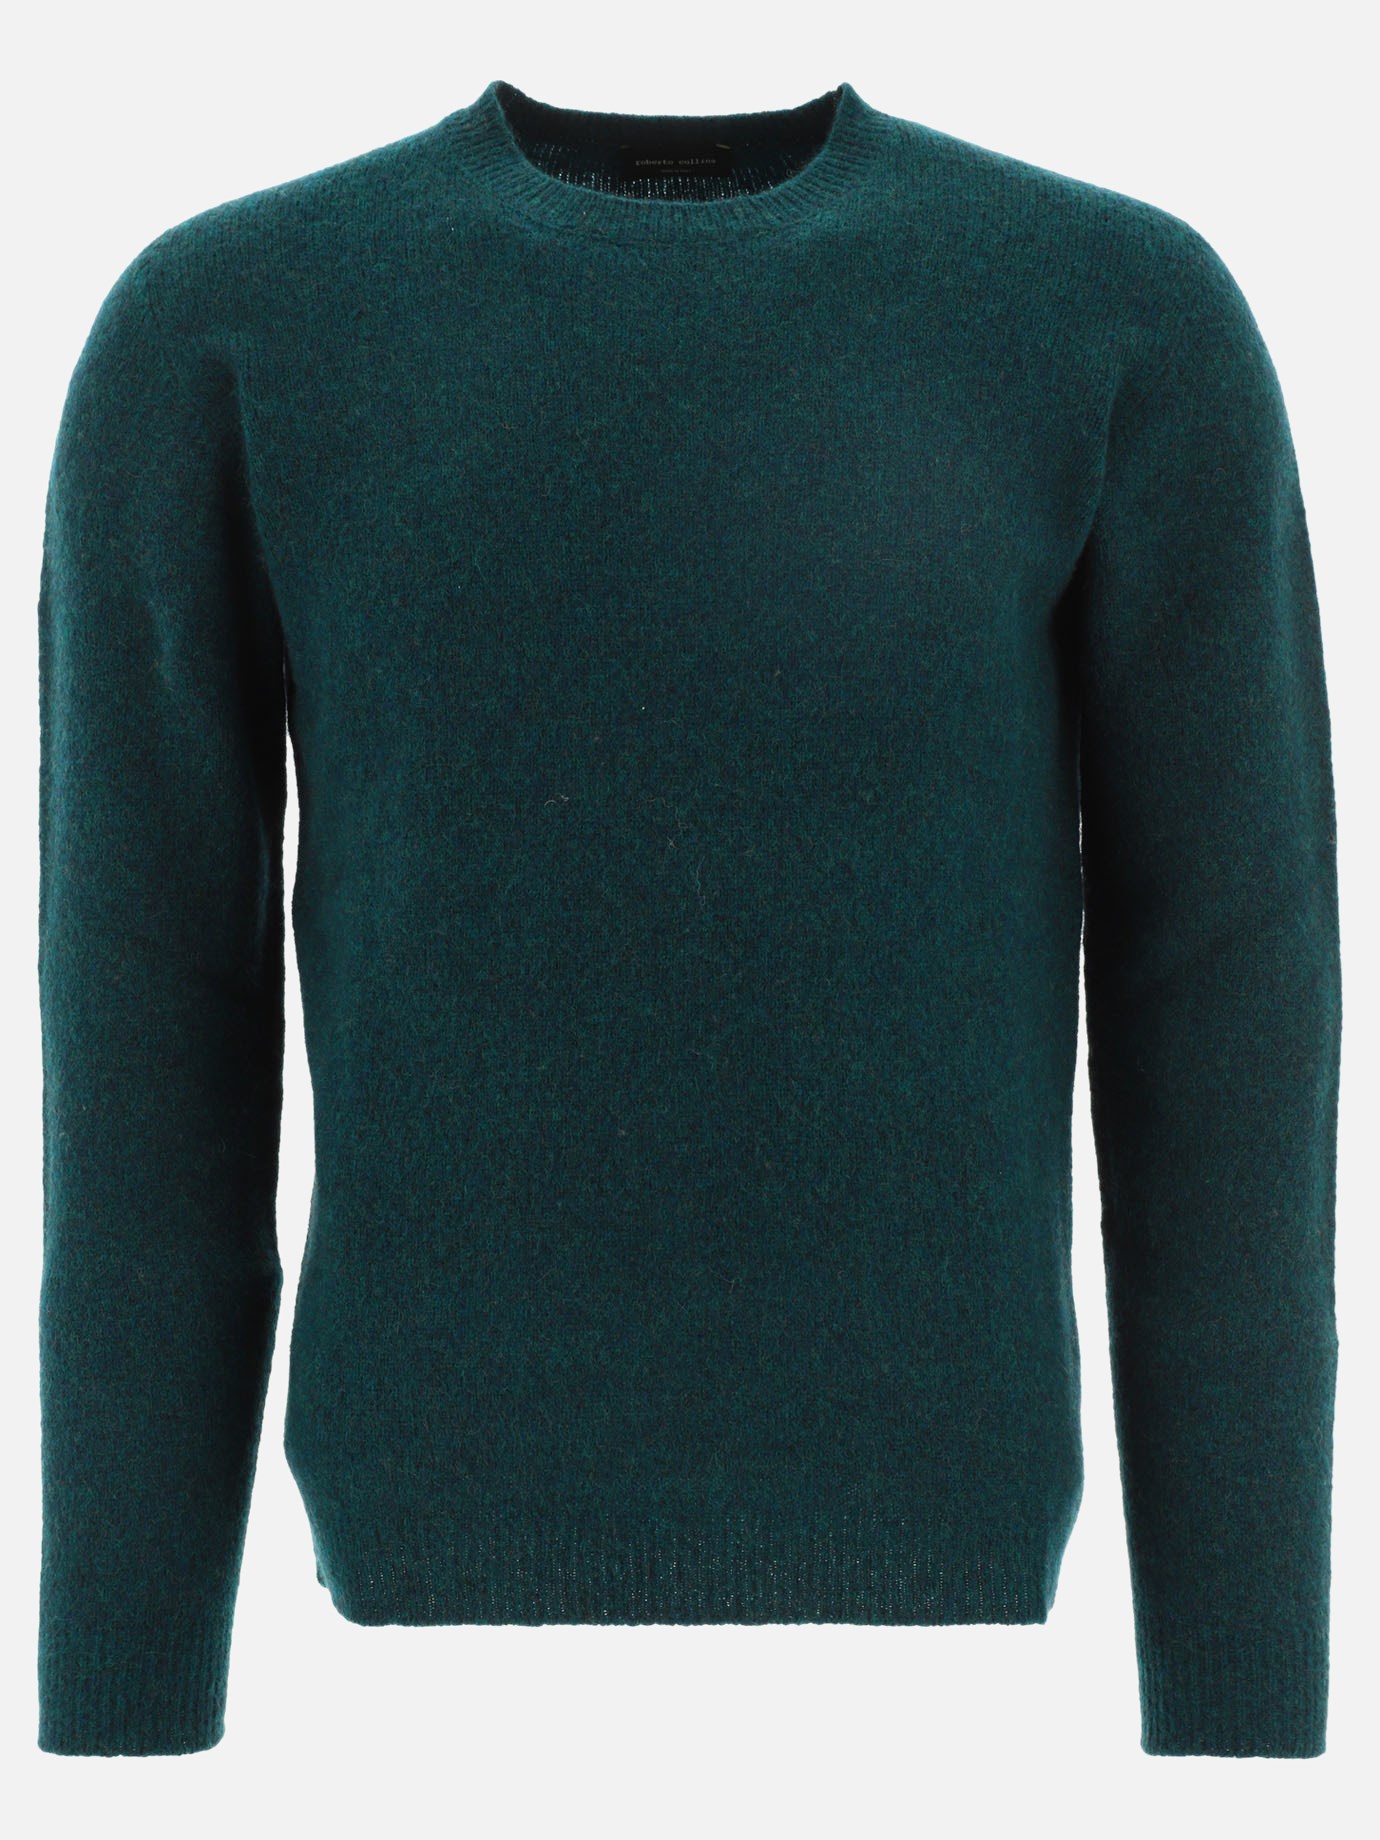 Sweater featuring  ribbed hem and cuffs